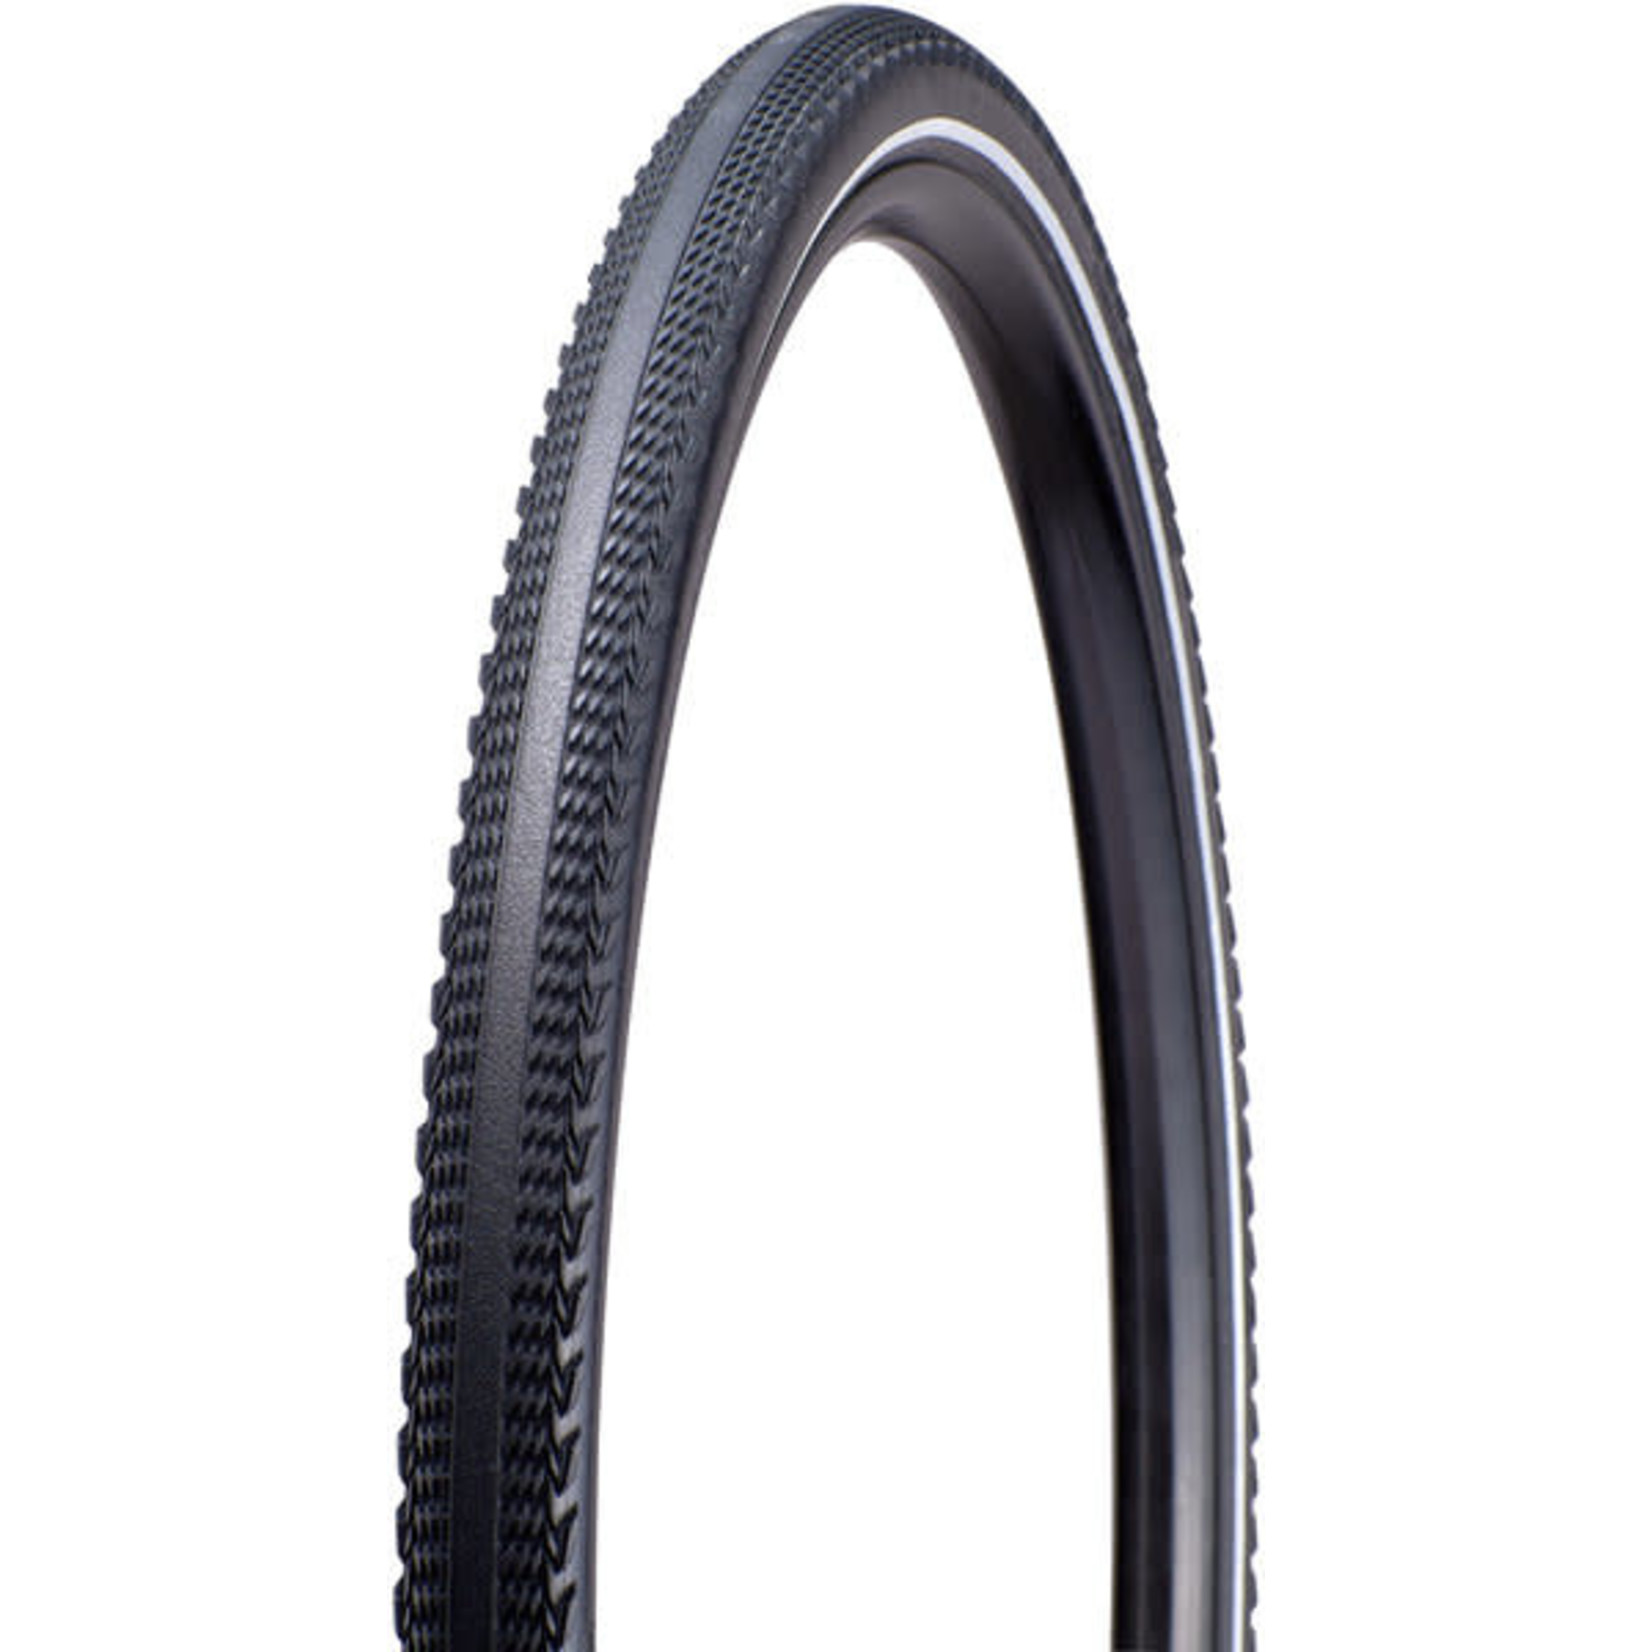 Specialized Pathfinder Sport Tire 700 x 38c Black With Reflective Wall